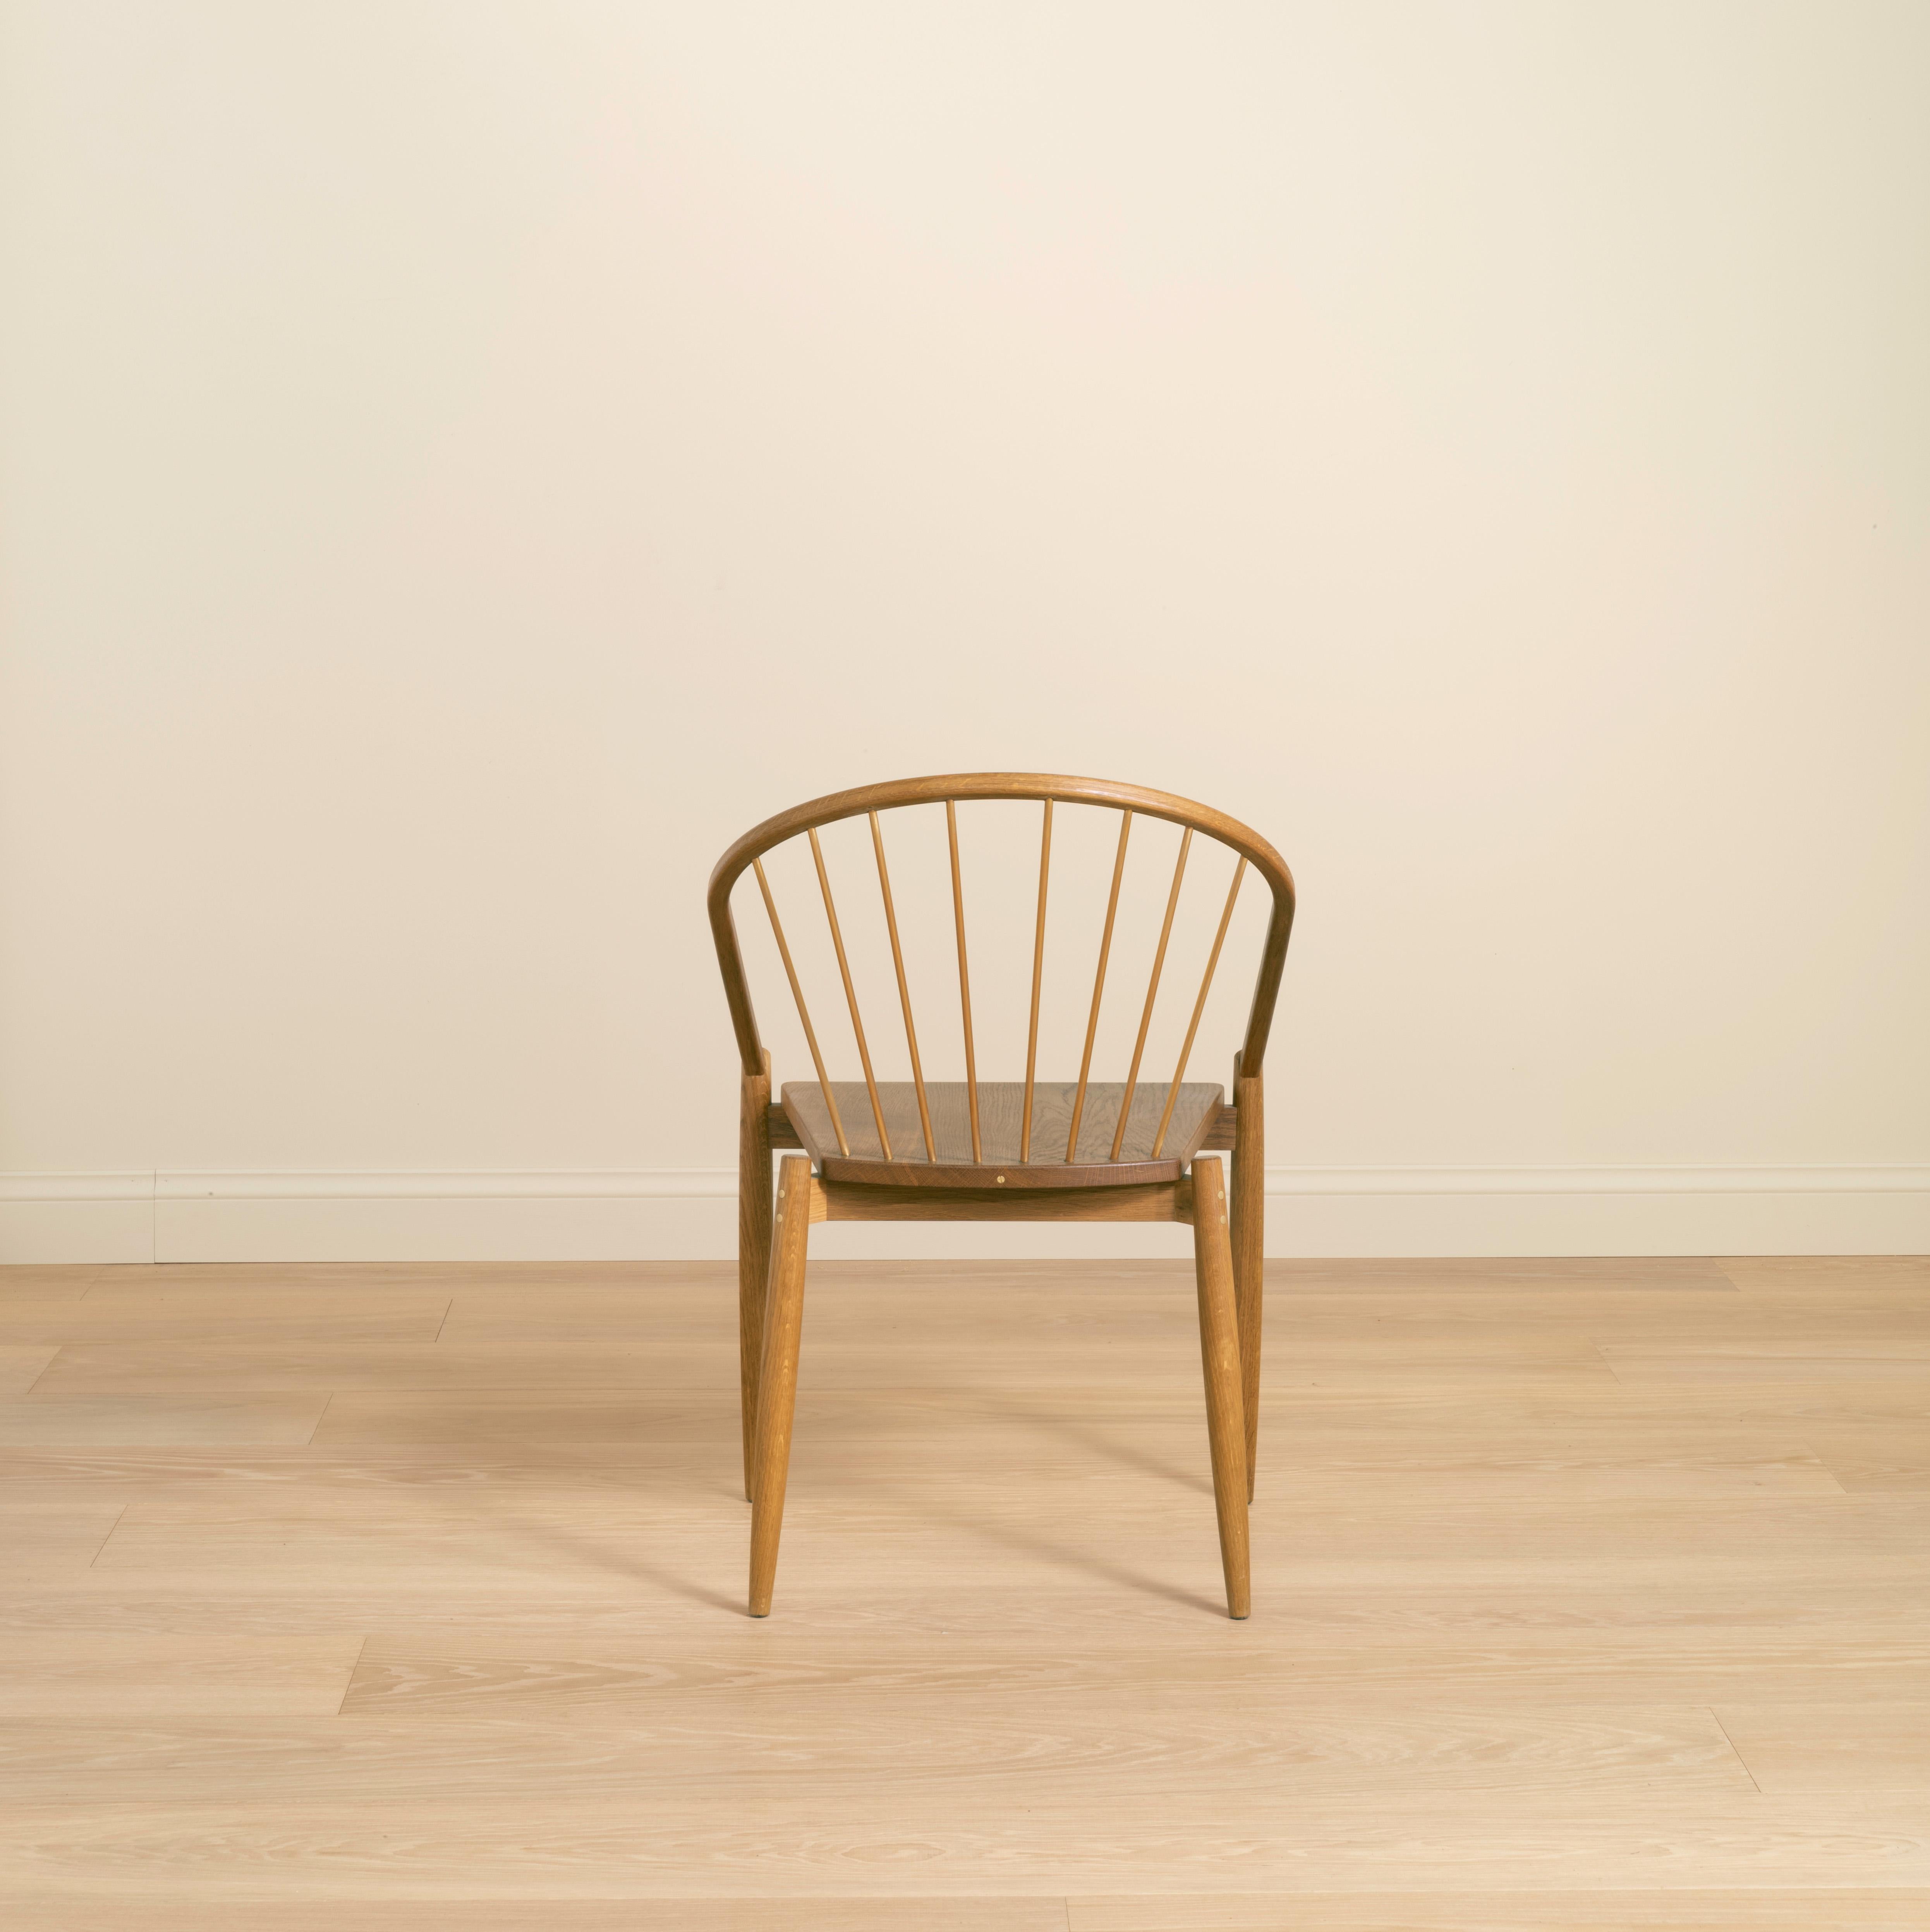 Hand-Crafted Rupert Bevan Harp Stacking Chair For Sale